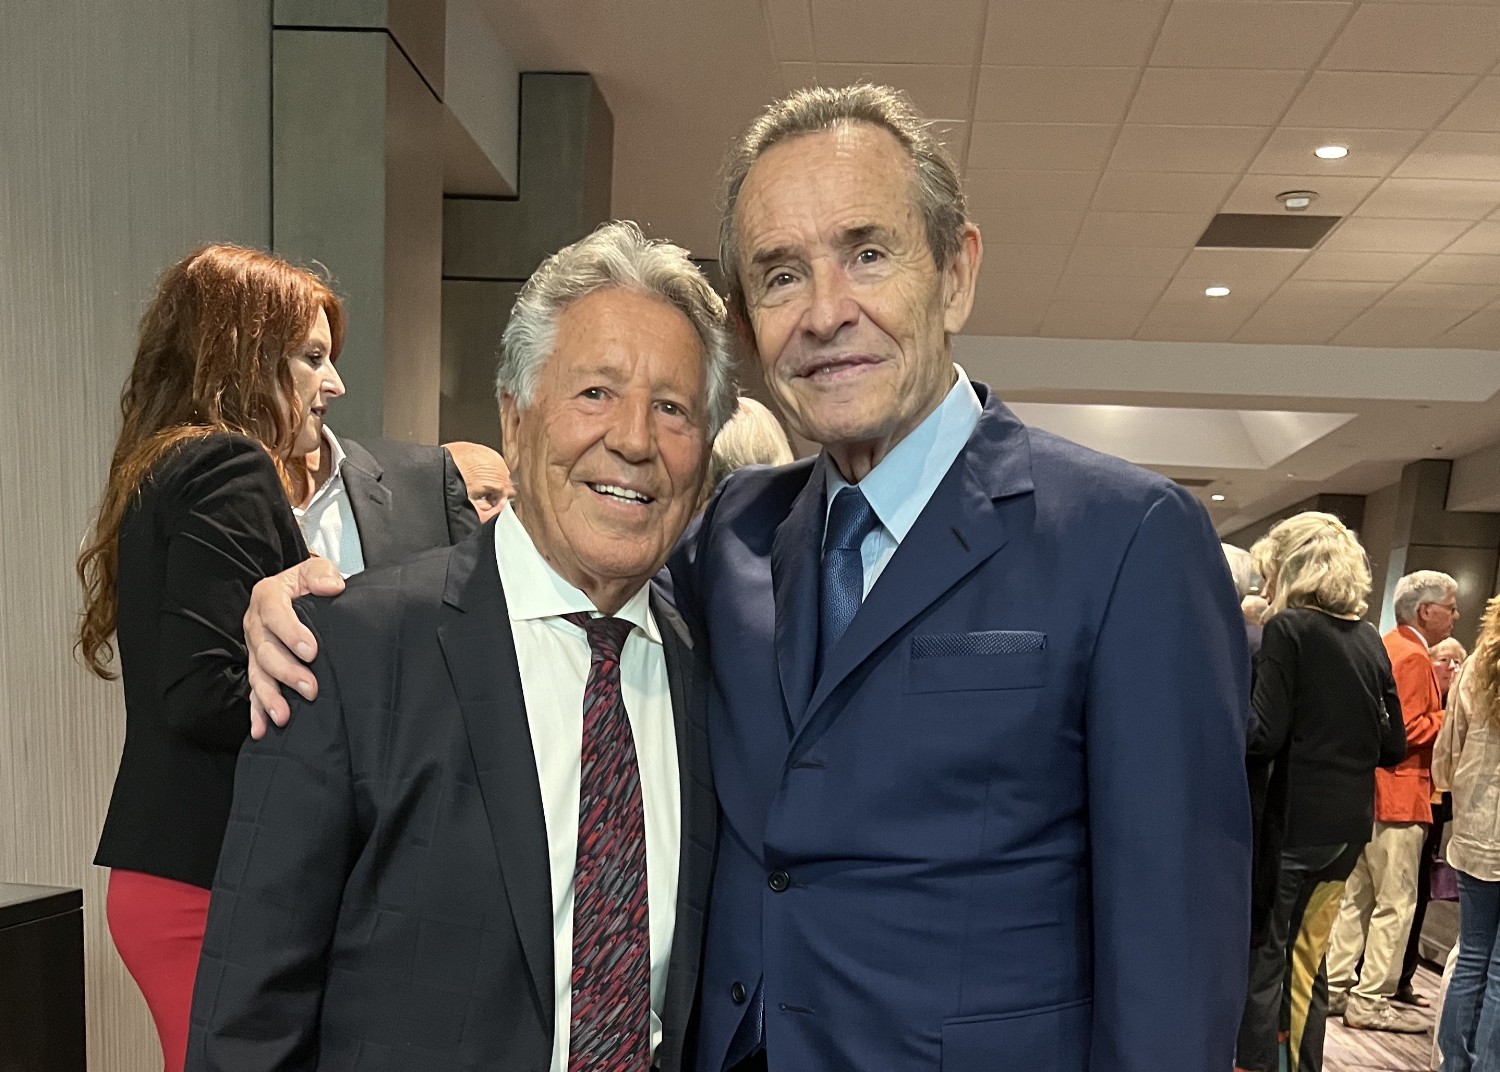 2023 Long Beach. Mario Andretti: Reunited with Jacky Ickx tonight in Long Beach. Teammates for 11 GP races for Ferrari and 9 long distance races.  The most amazing teammate a guy could want. If I had to pick a guy I'd most like on my team right here right now and if it can't be my son Michael, I'd pick Jacky.